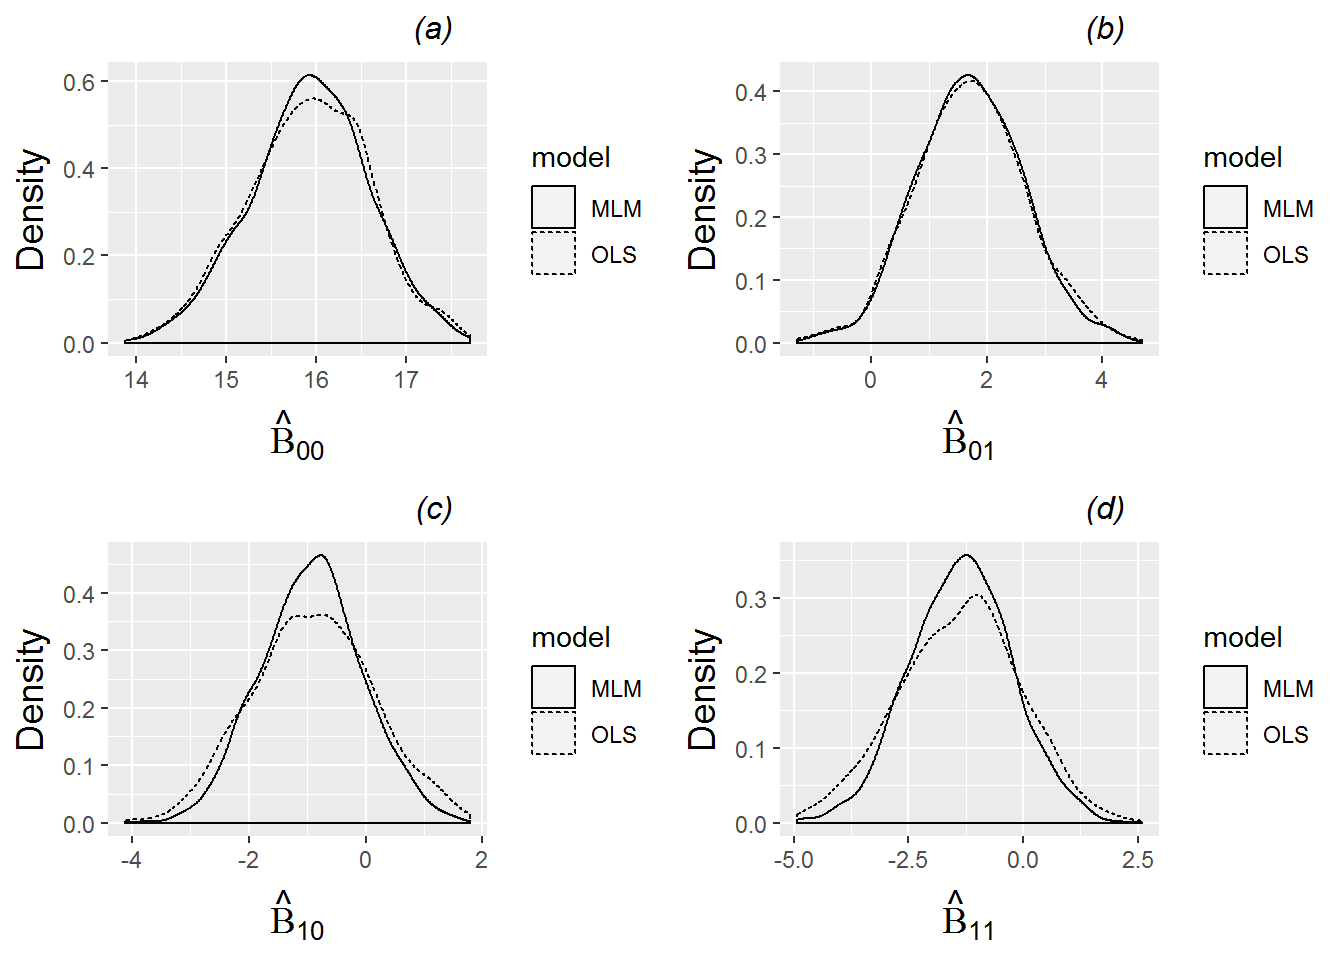 Density plots of parameter estimates for the four fixed effects of Model C under both a multilevel model and OLS regression. 1000 sets of simulated data for the 37 subjects in our study were produced using estimated fixed and random effects from Model C. For each set of simulated data, estimates of (a) \(\alpha_{0}\), (b) \(\alpha_{1}\), (c) \(\beta_{0}\), and (d) \(\beta_{1}\) were obtained using both a multilevel and an OLS regression model. Each plot then shows a density plot for the 1000 estimates of the corresponding fixed effect using multilevel modeling vs. a similar density plot for the 1000 estimates using OLS regression.